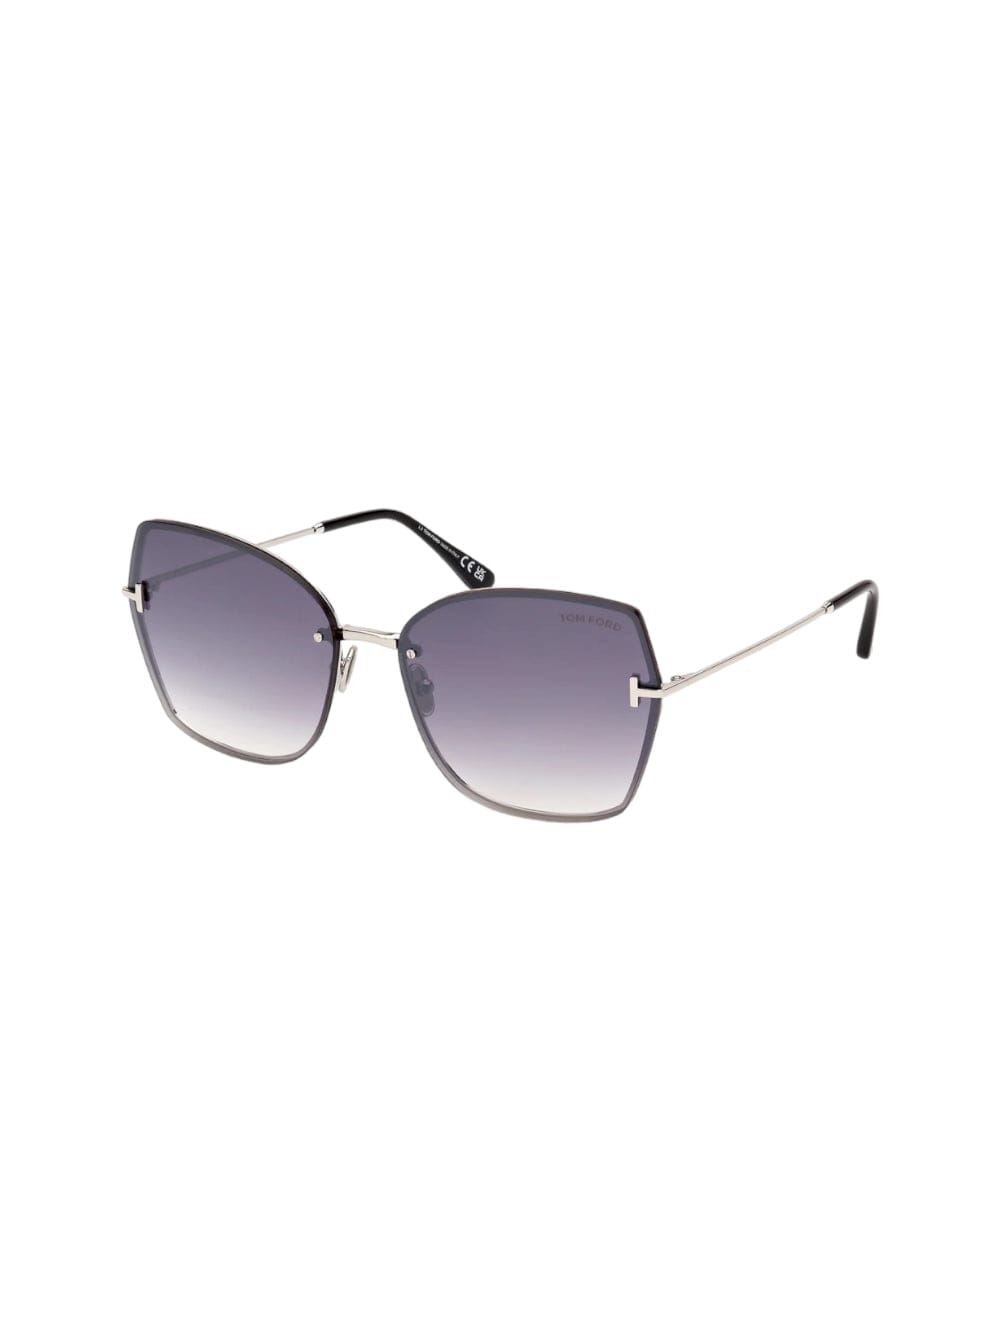 Tom Ford Nickie - Ft 1107 /s Sunglasses In Gray